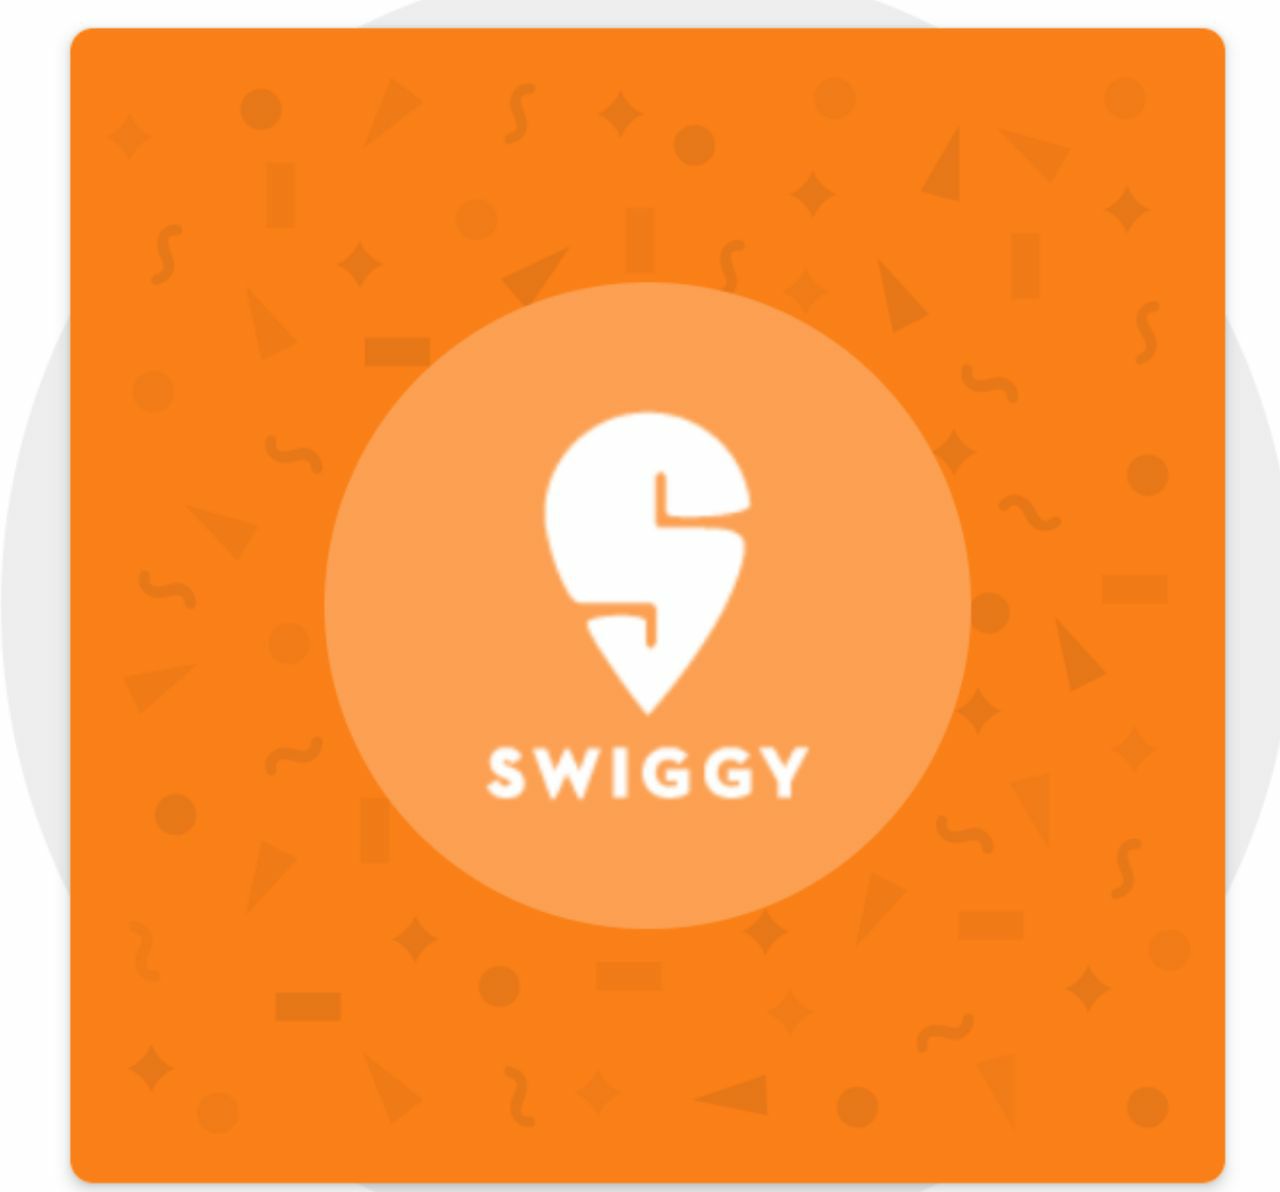 Google Pay - Earn a Scratch Card Worth Rs.25 to Rs.100 when You Spend at Least Rs.100 on Swiggy